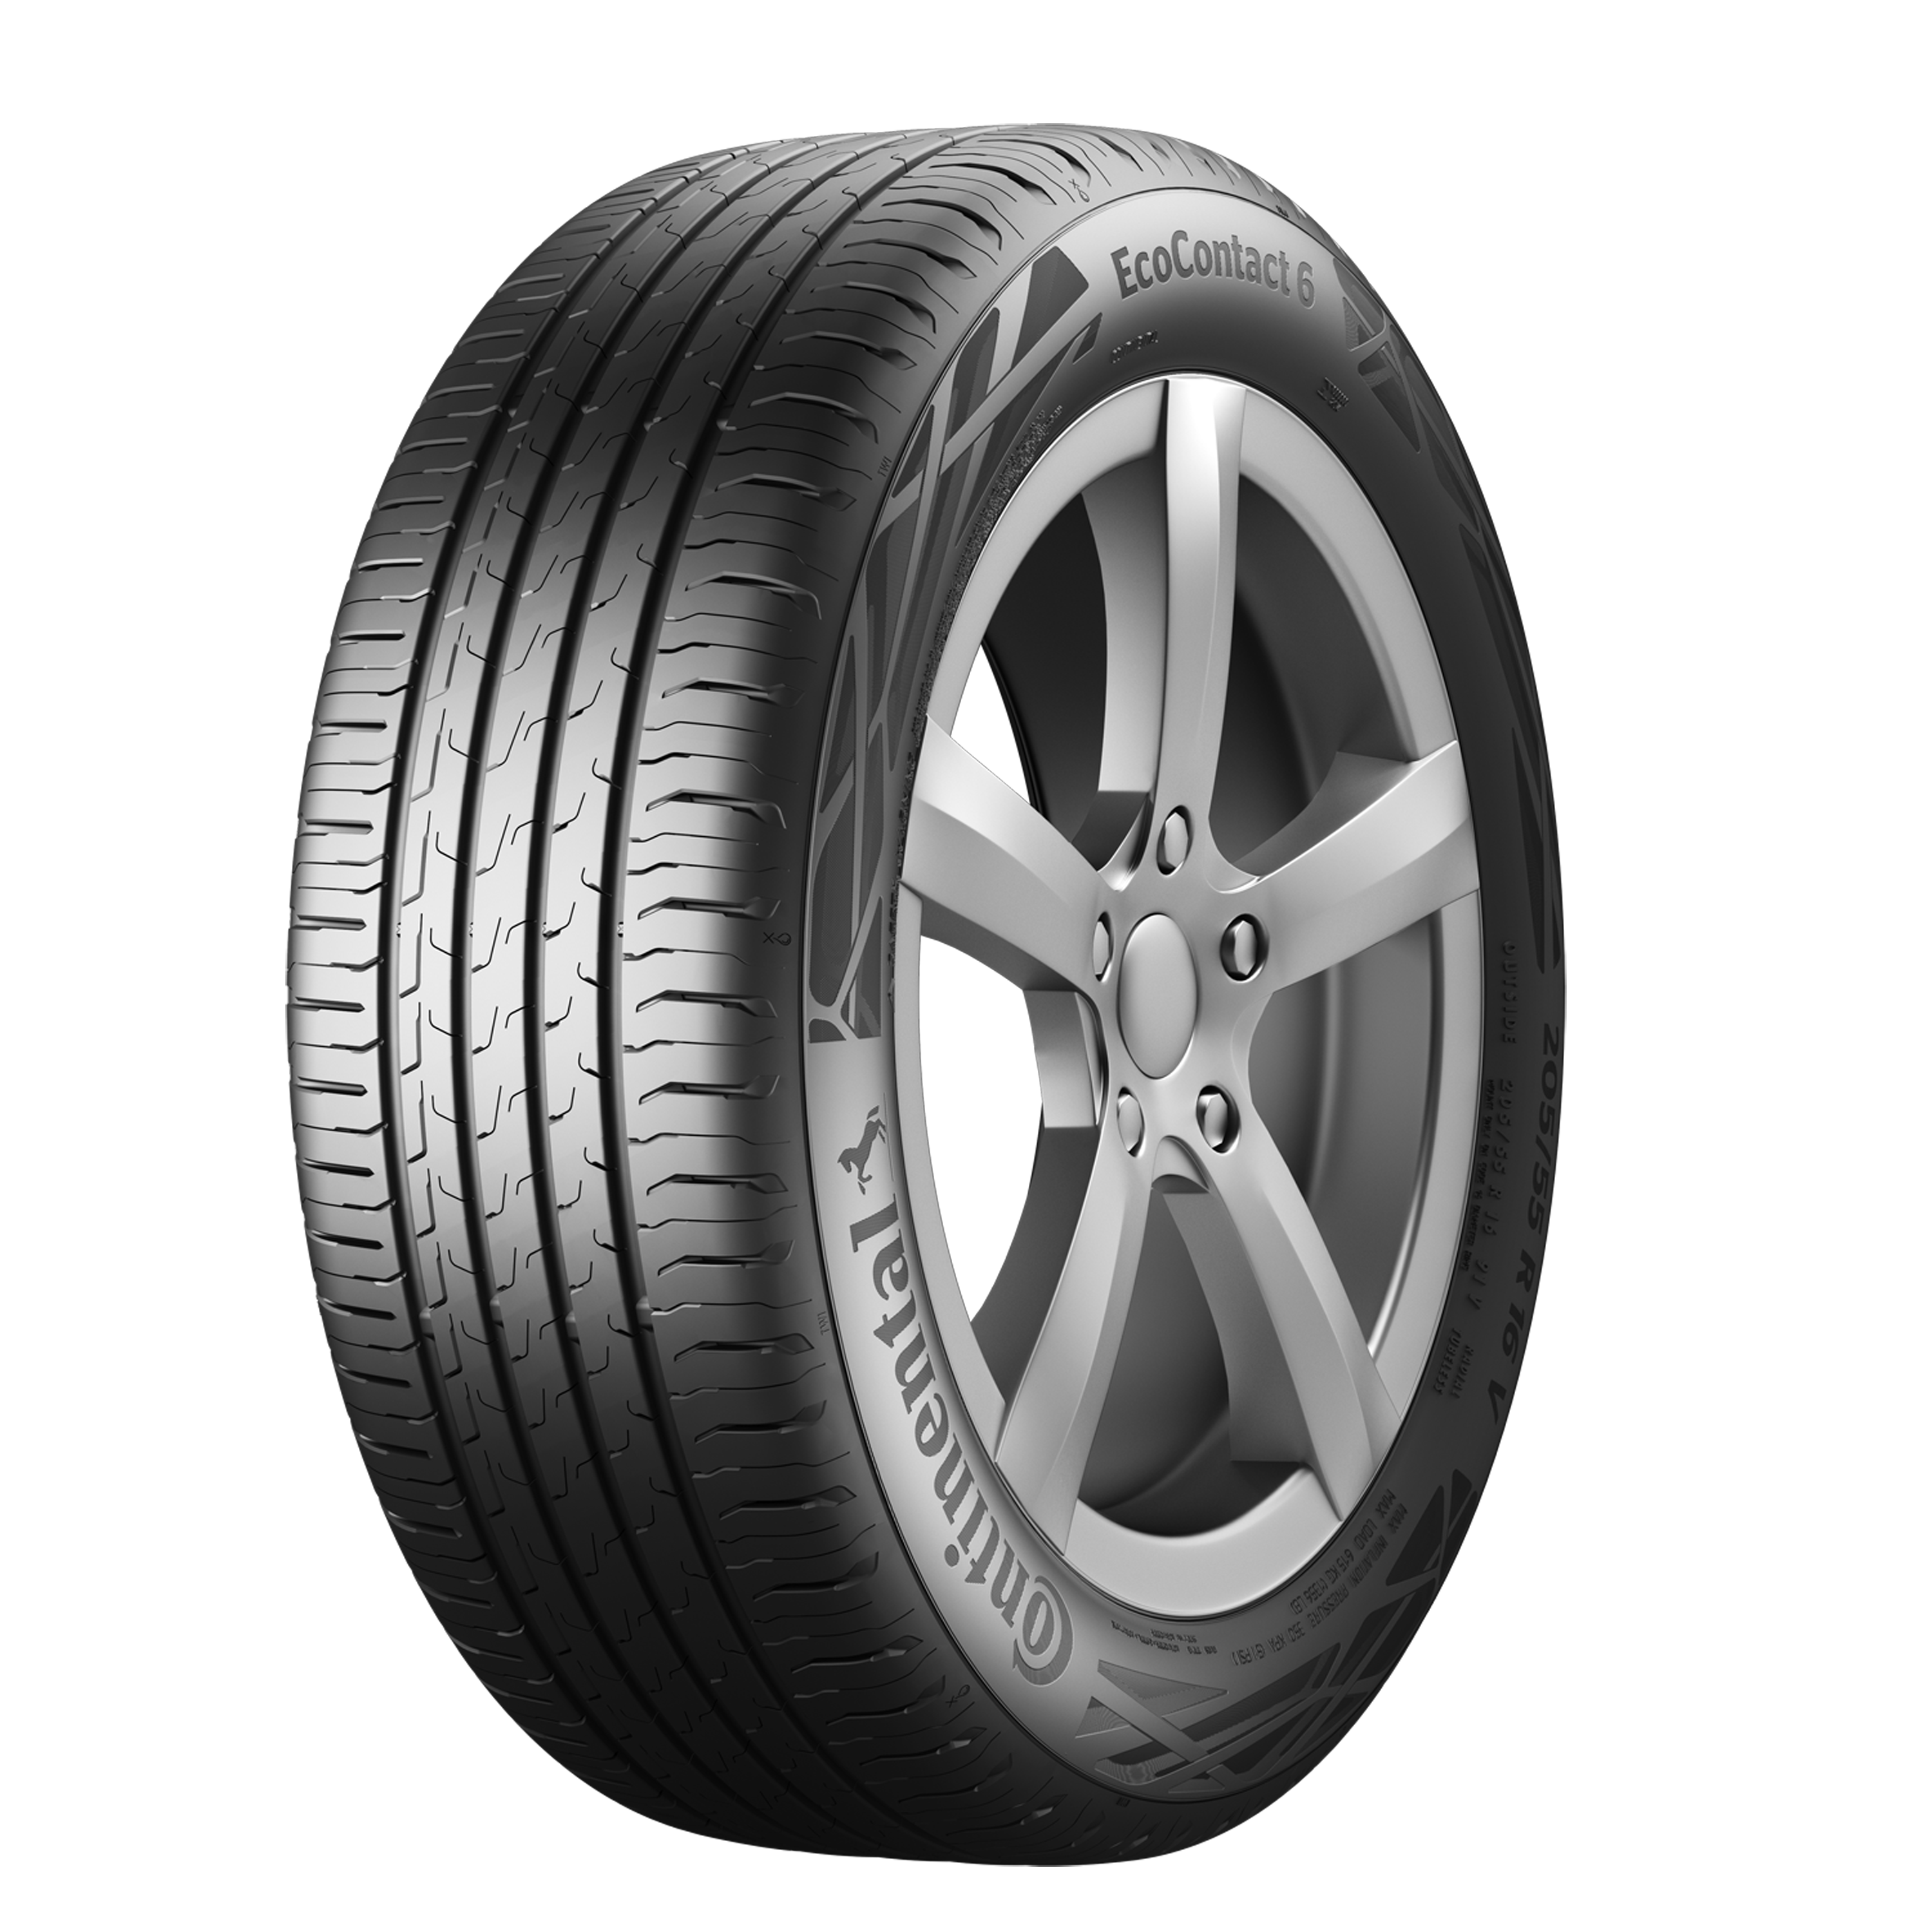 tires - from Continental Summer car Continental AG